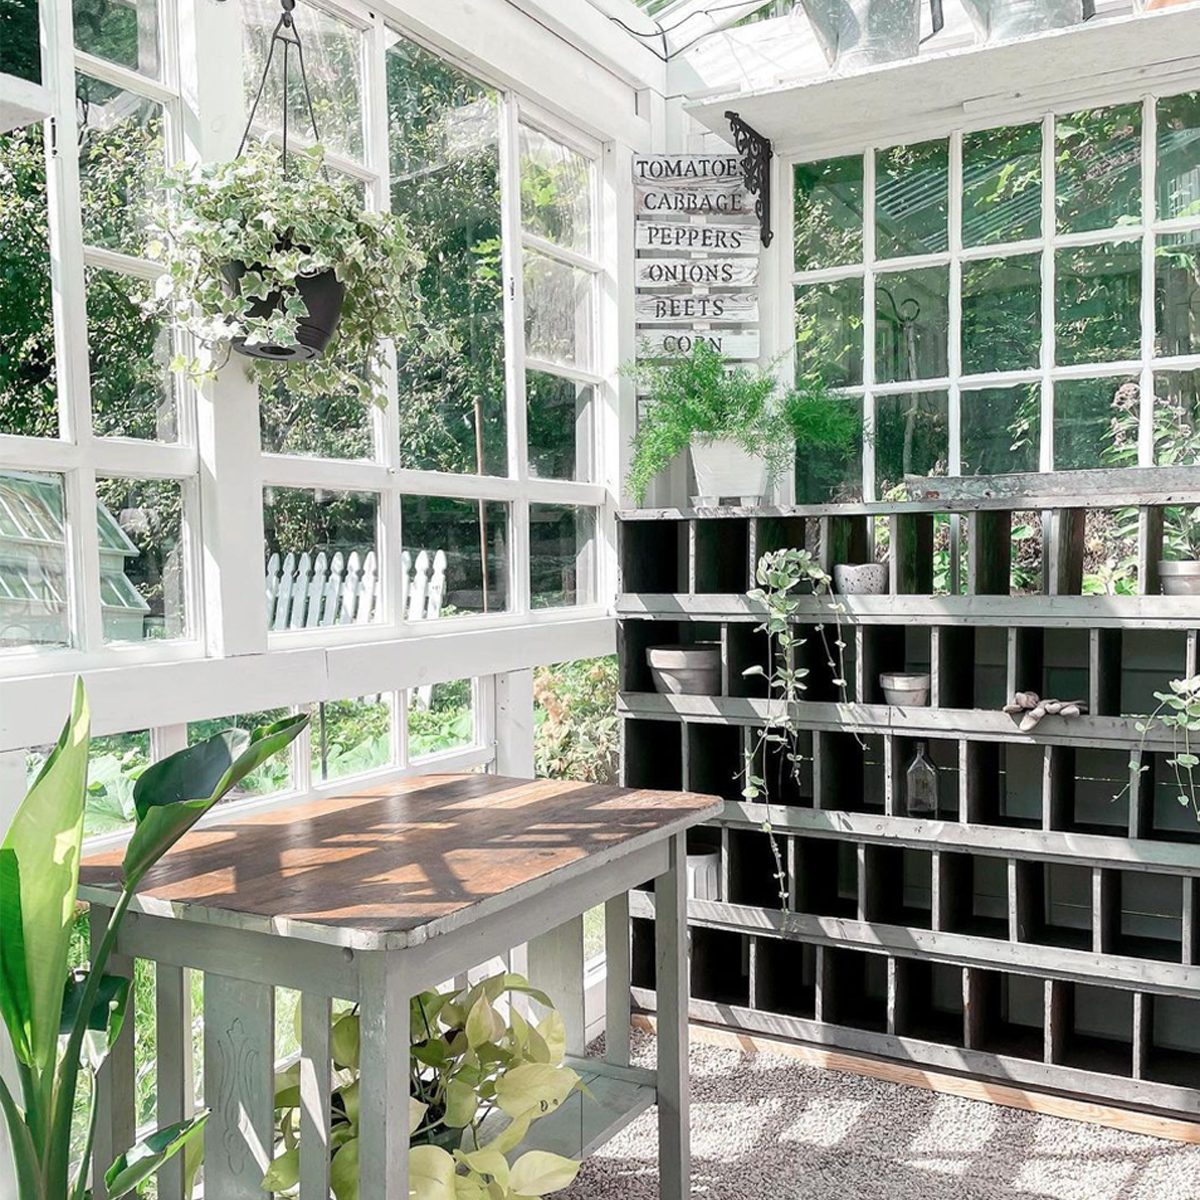 Vintage Greenhouse Shelving Cubbies Courtesy @thehouseonlilac Via Instagram